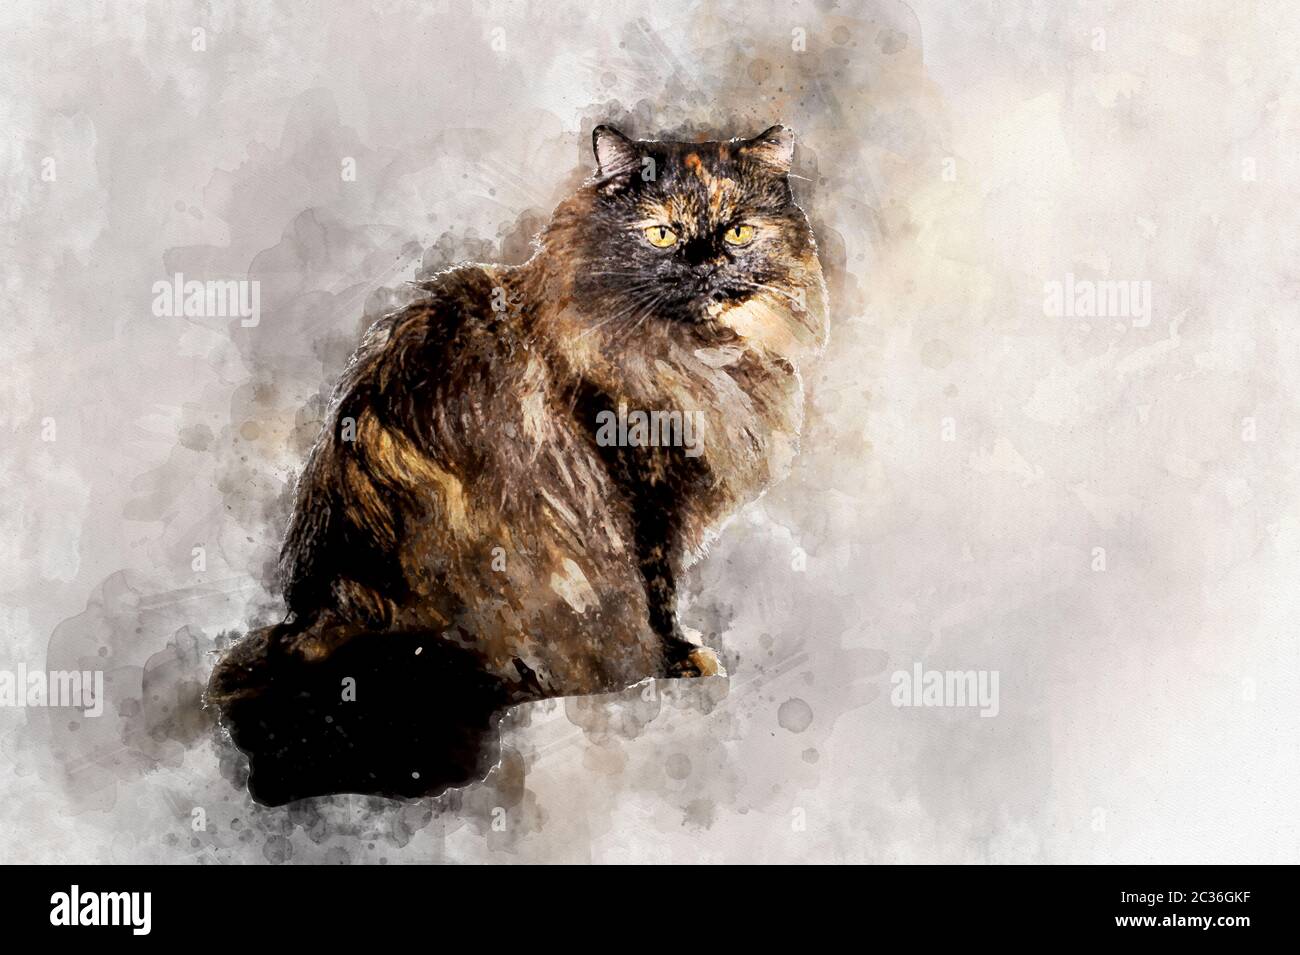 Fluffy black-haired cat sitting and looking sadly . Stylization in watercolor drawing. Stock Photo